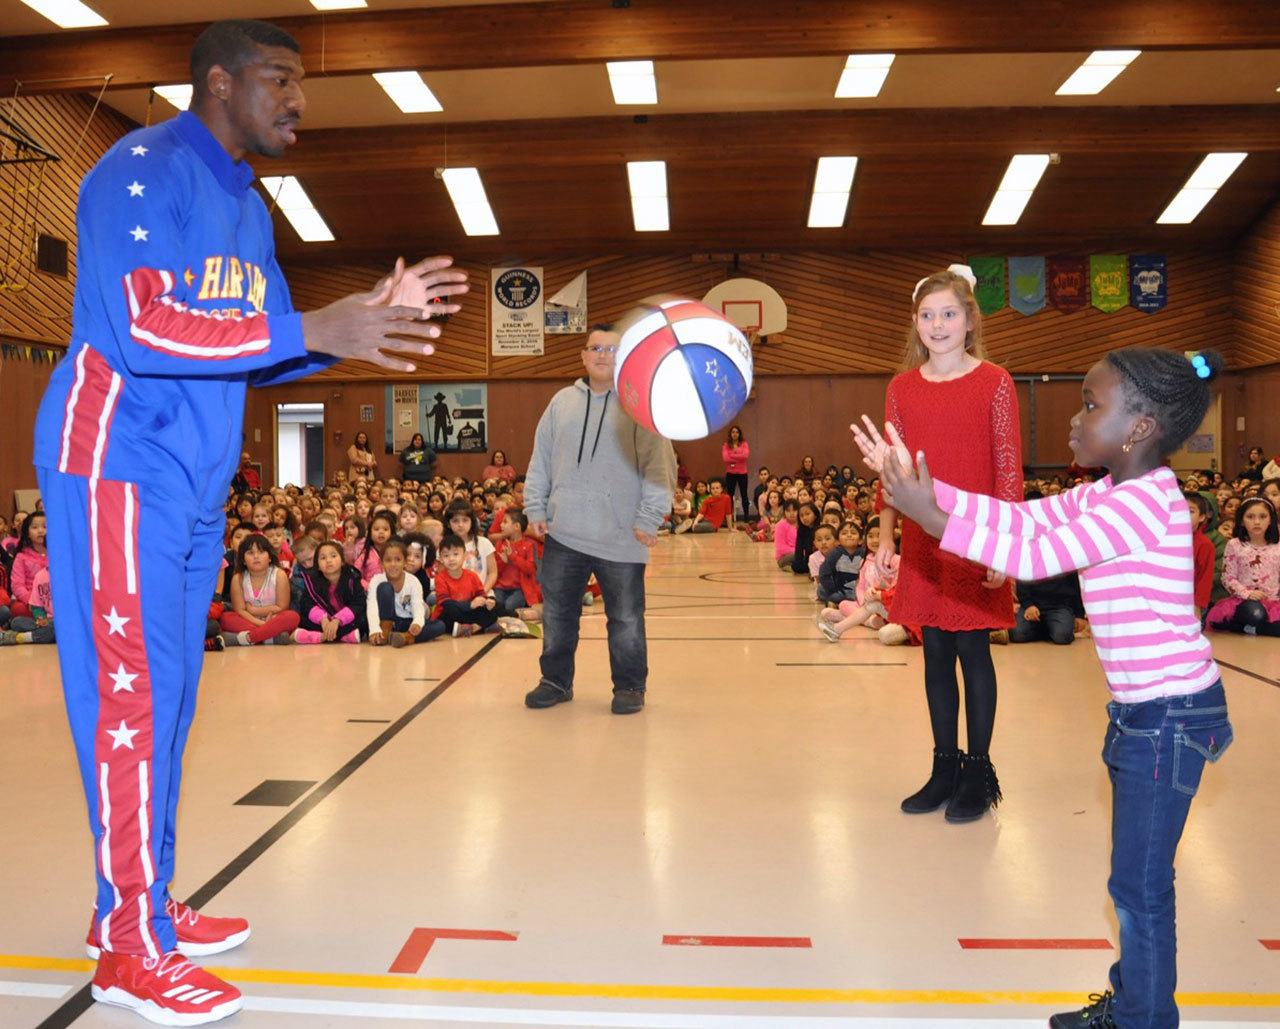 Anthony ‘Buckets’ Blakes throws the ball to Fatoumata Sanneh during the Harlem Globetrotter’s visit to Evergreen Heights Elementary School on Tuesday. RACHEL CIAMPI, Auburn Reporter